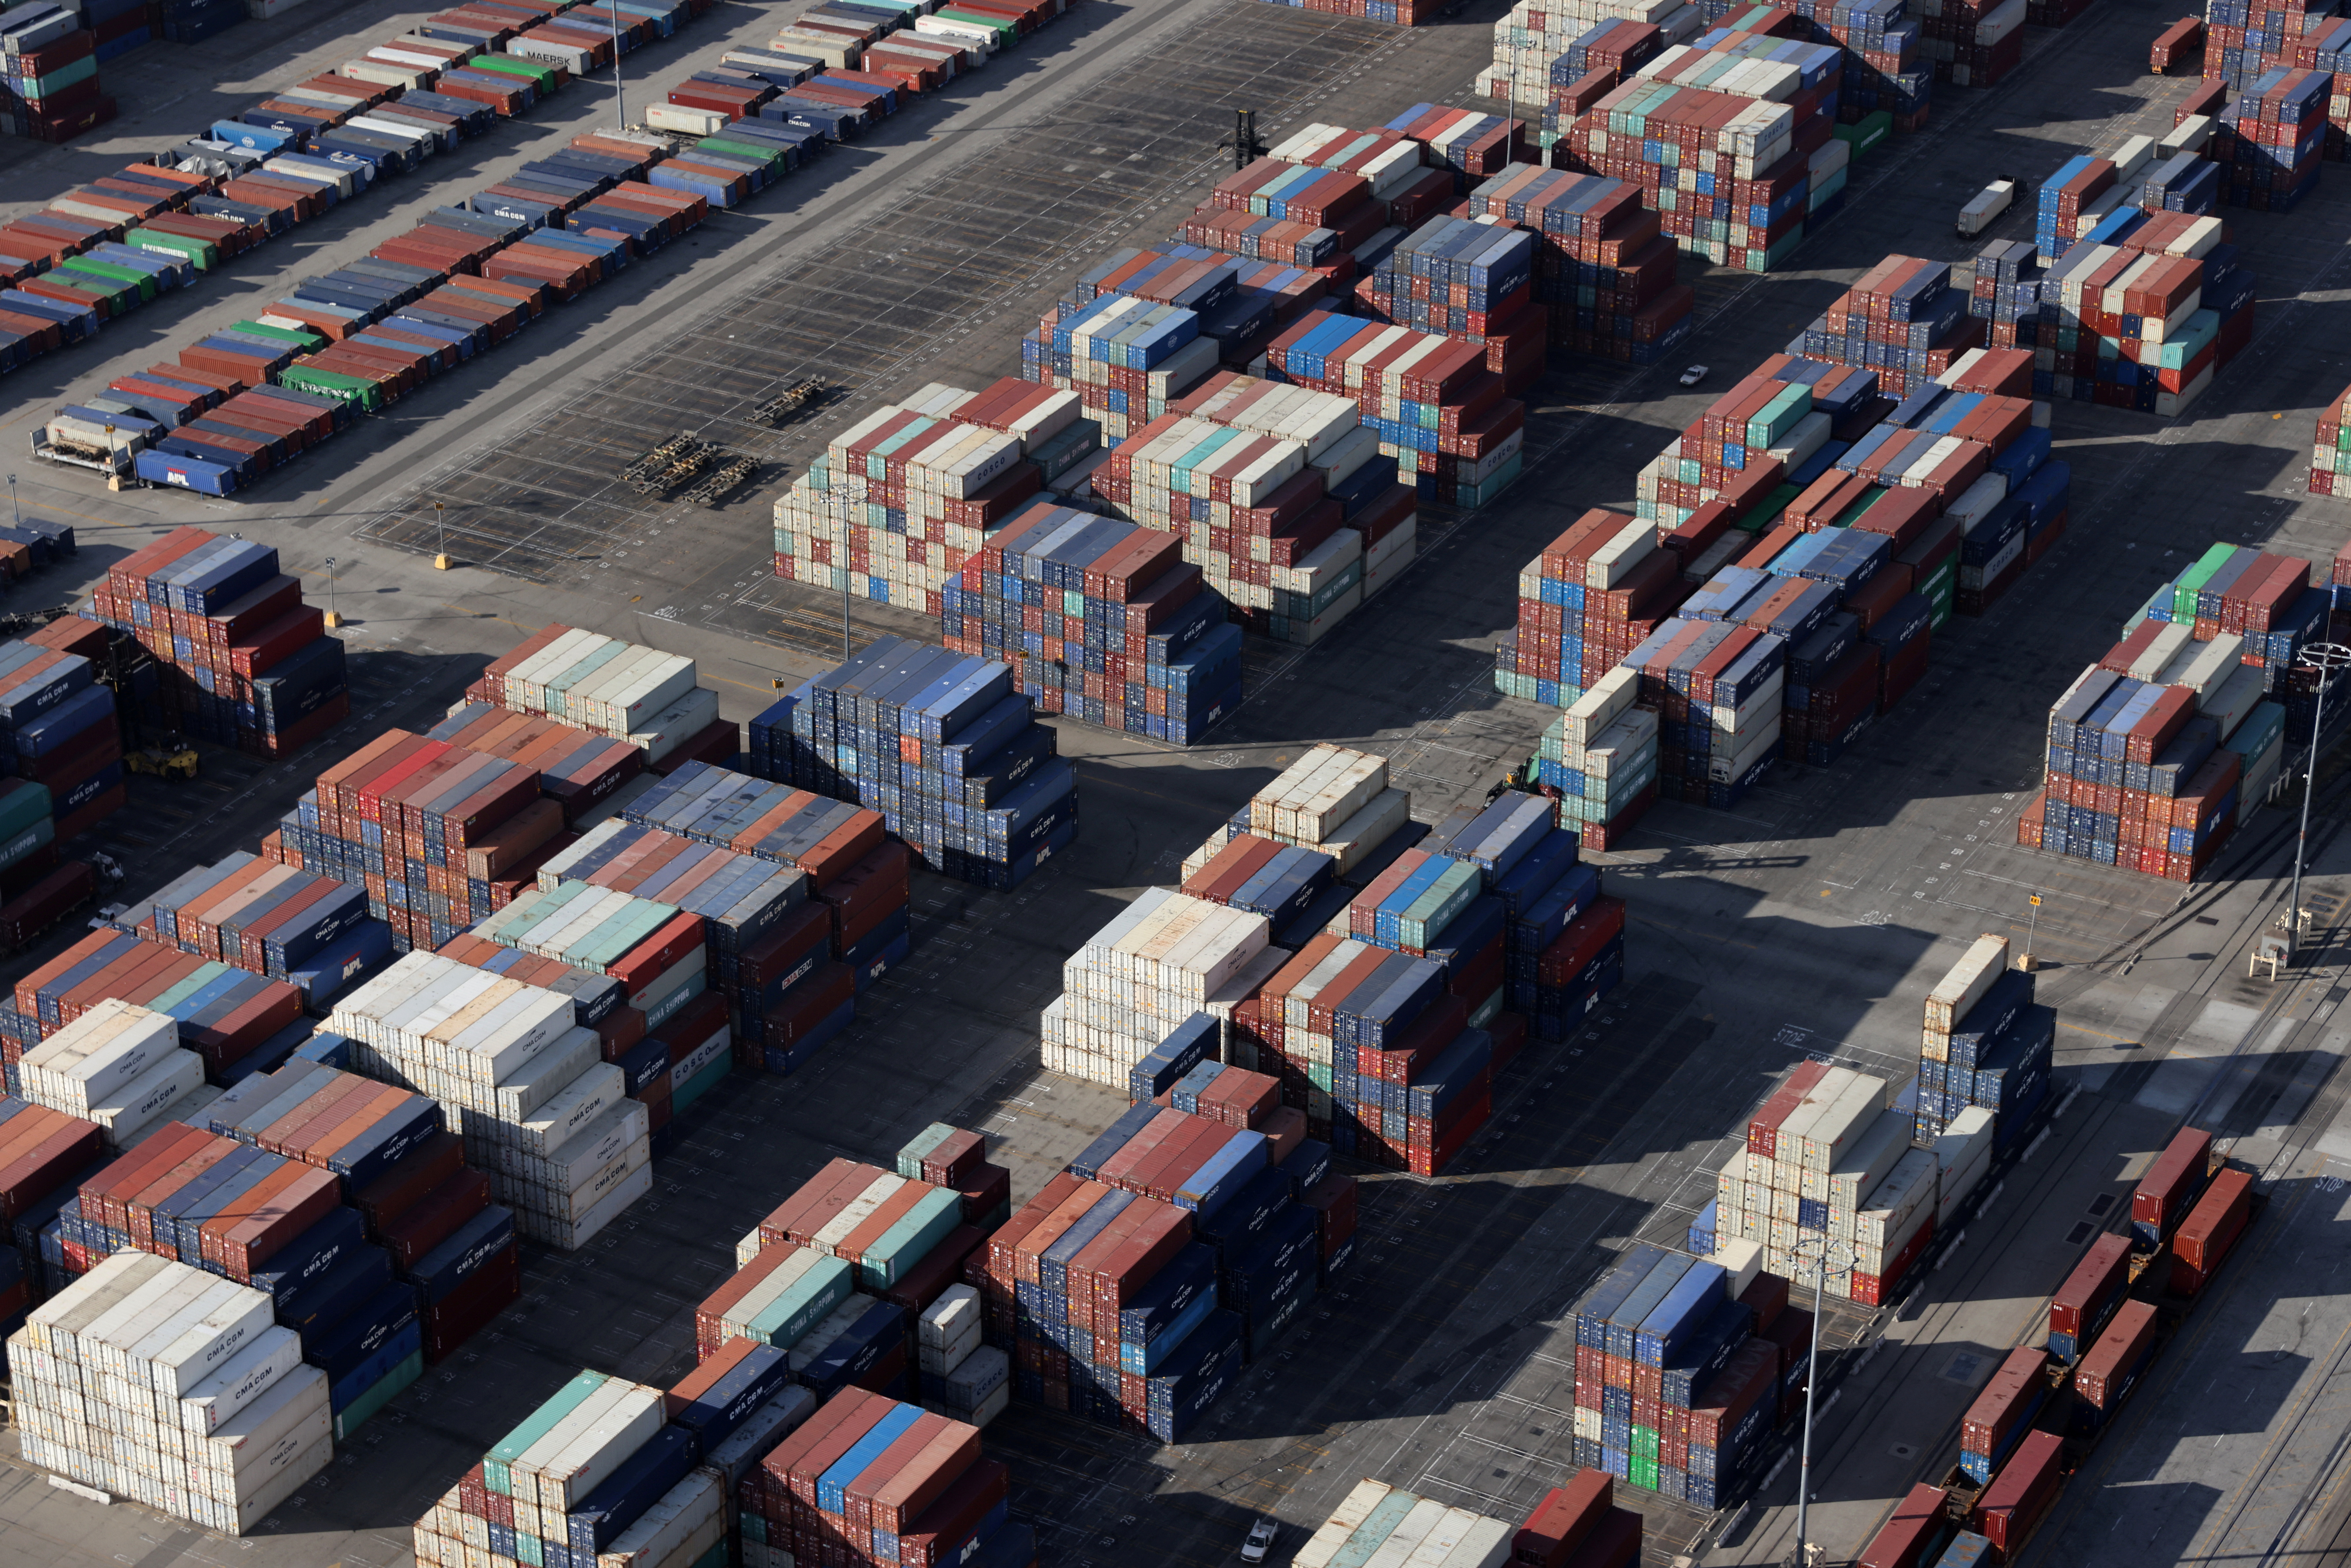 Shipping containers sit on the dock at a container terminal at the Port of Long Beach-Port of Los Angeles complex, amid the coronavirus disease (COVID-19) pandemic, in Los Angeles, California, U.S., April 7, 2021. REUTERS/Lucy Nicholson/File Photo